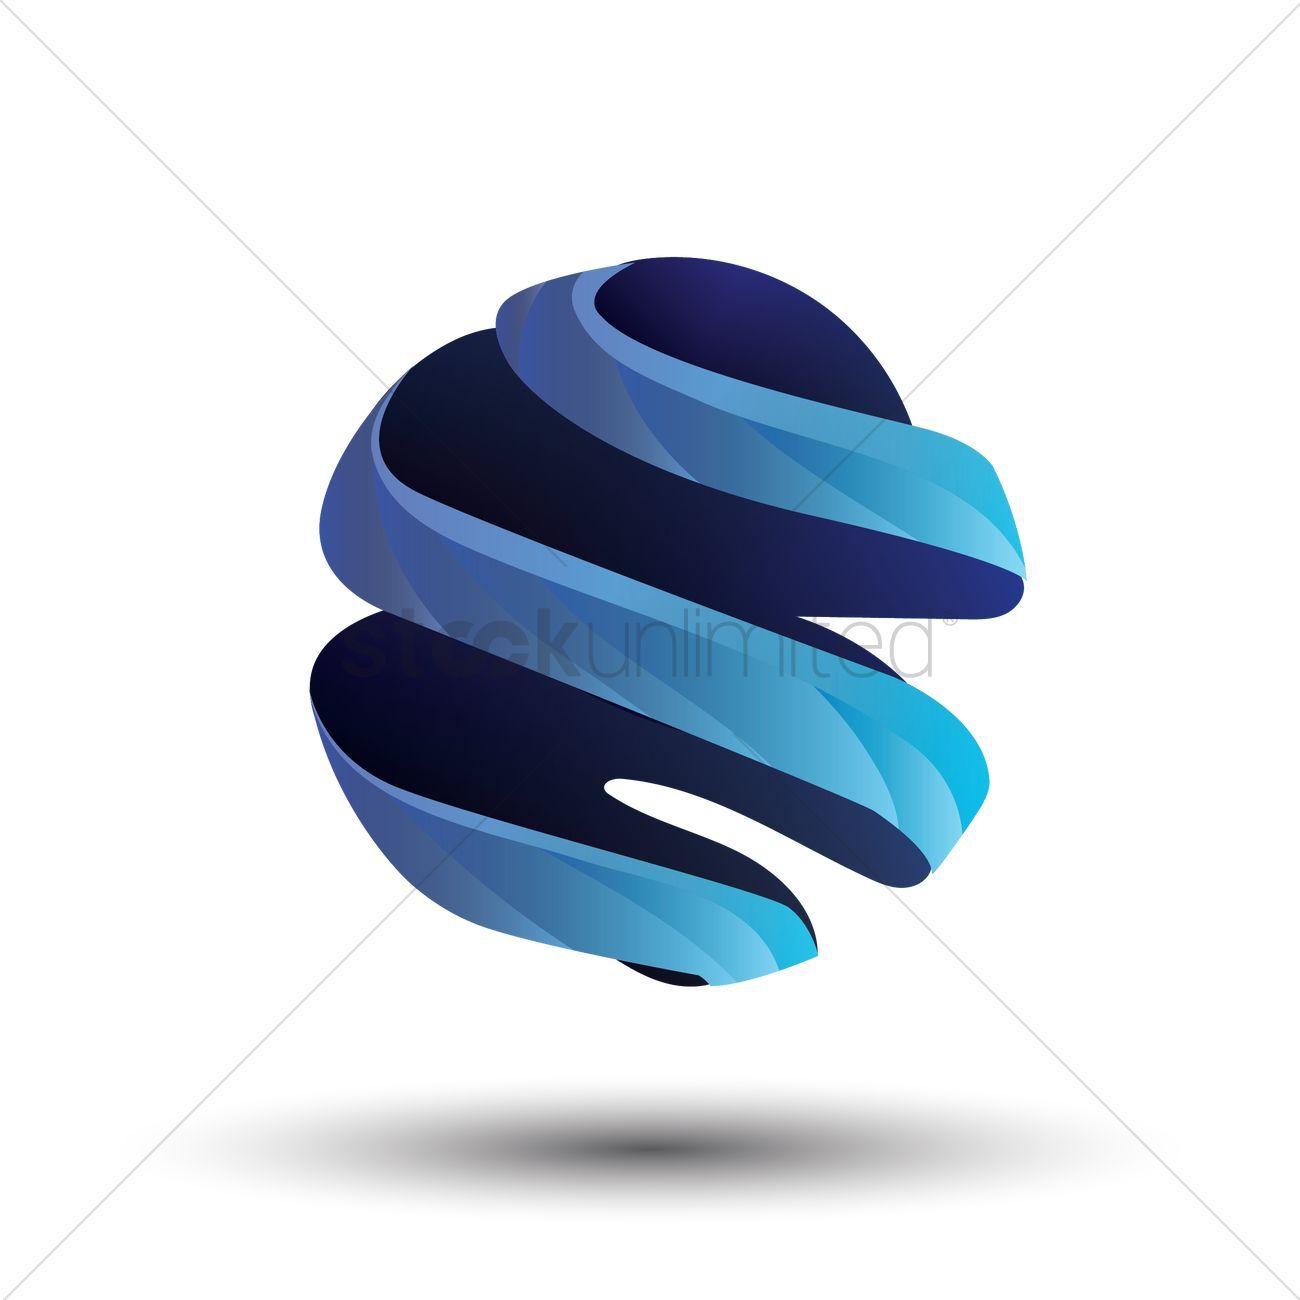 Spherical Logo - Abstract spherical logo Vector Image - 1610854 | StockUnlimited